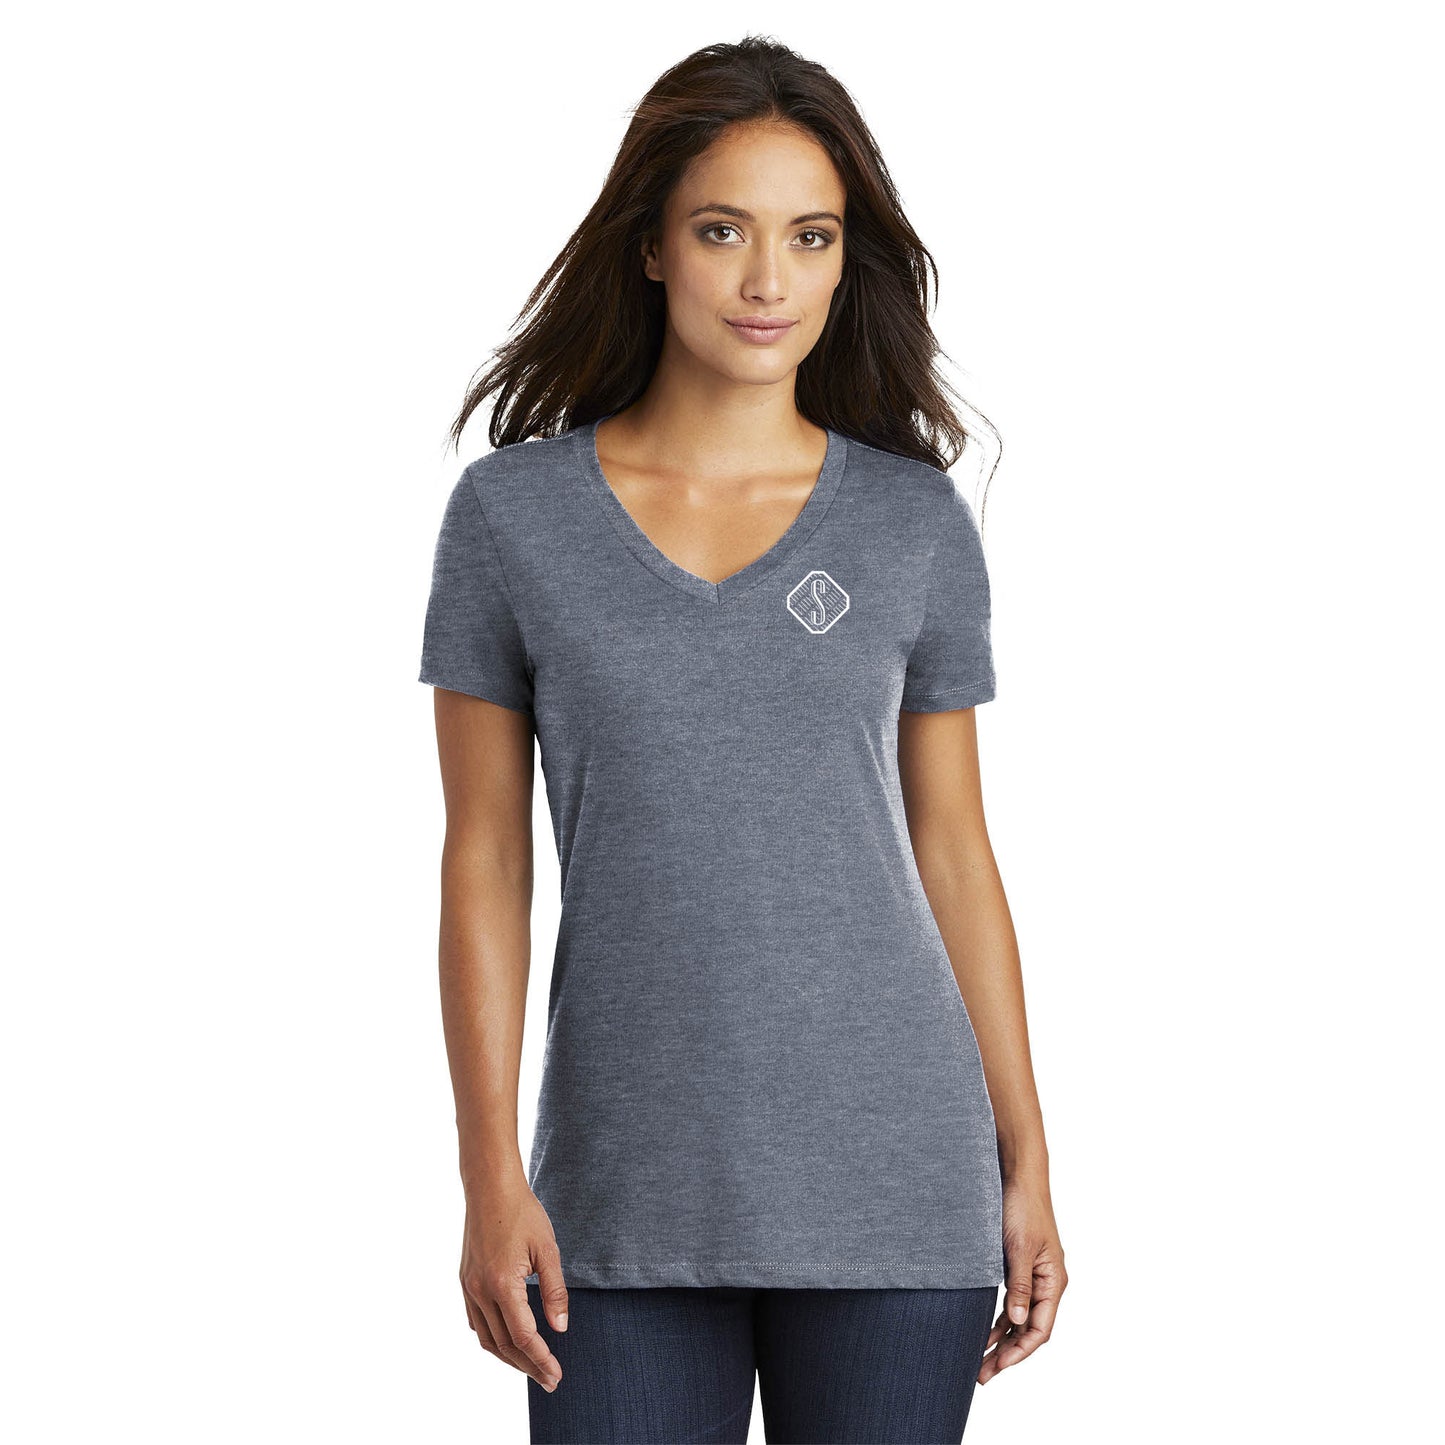 District ® Women’s Perfect Weight ® V-Neck Tee